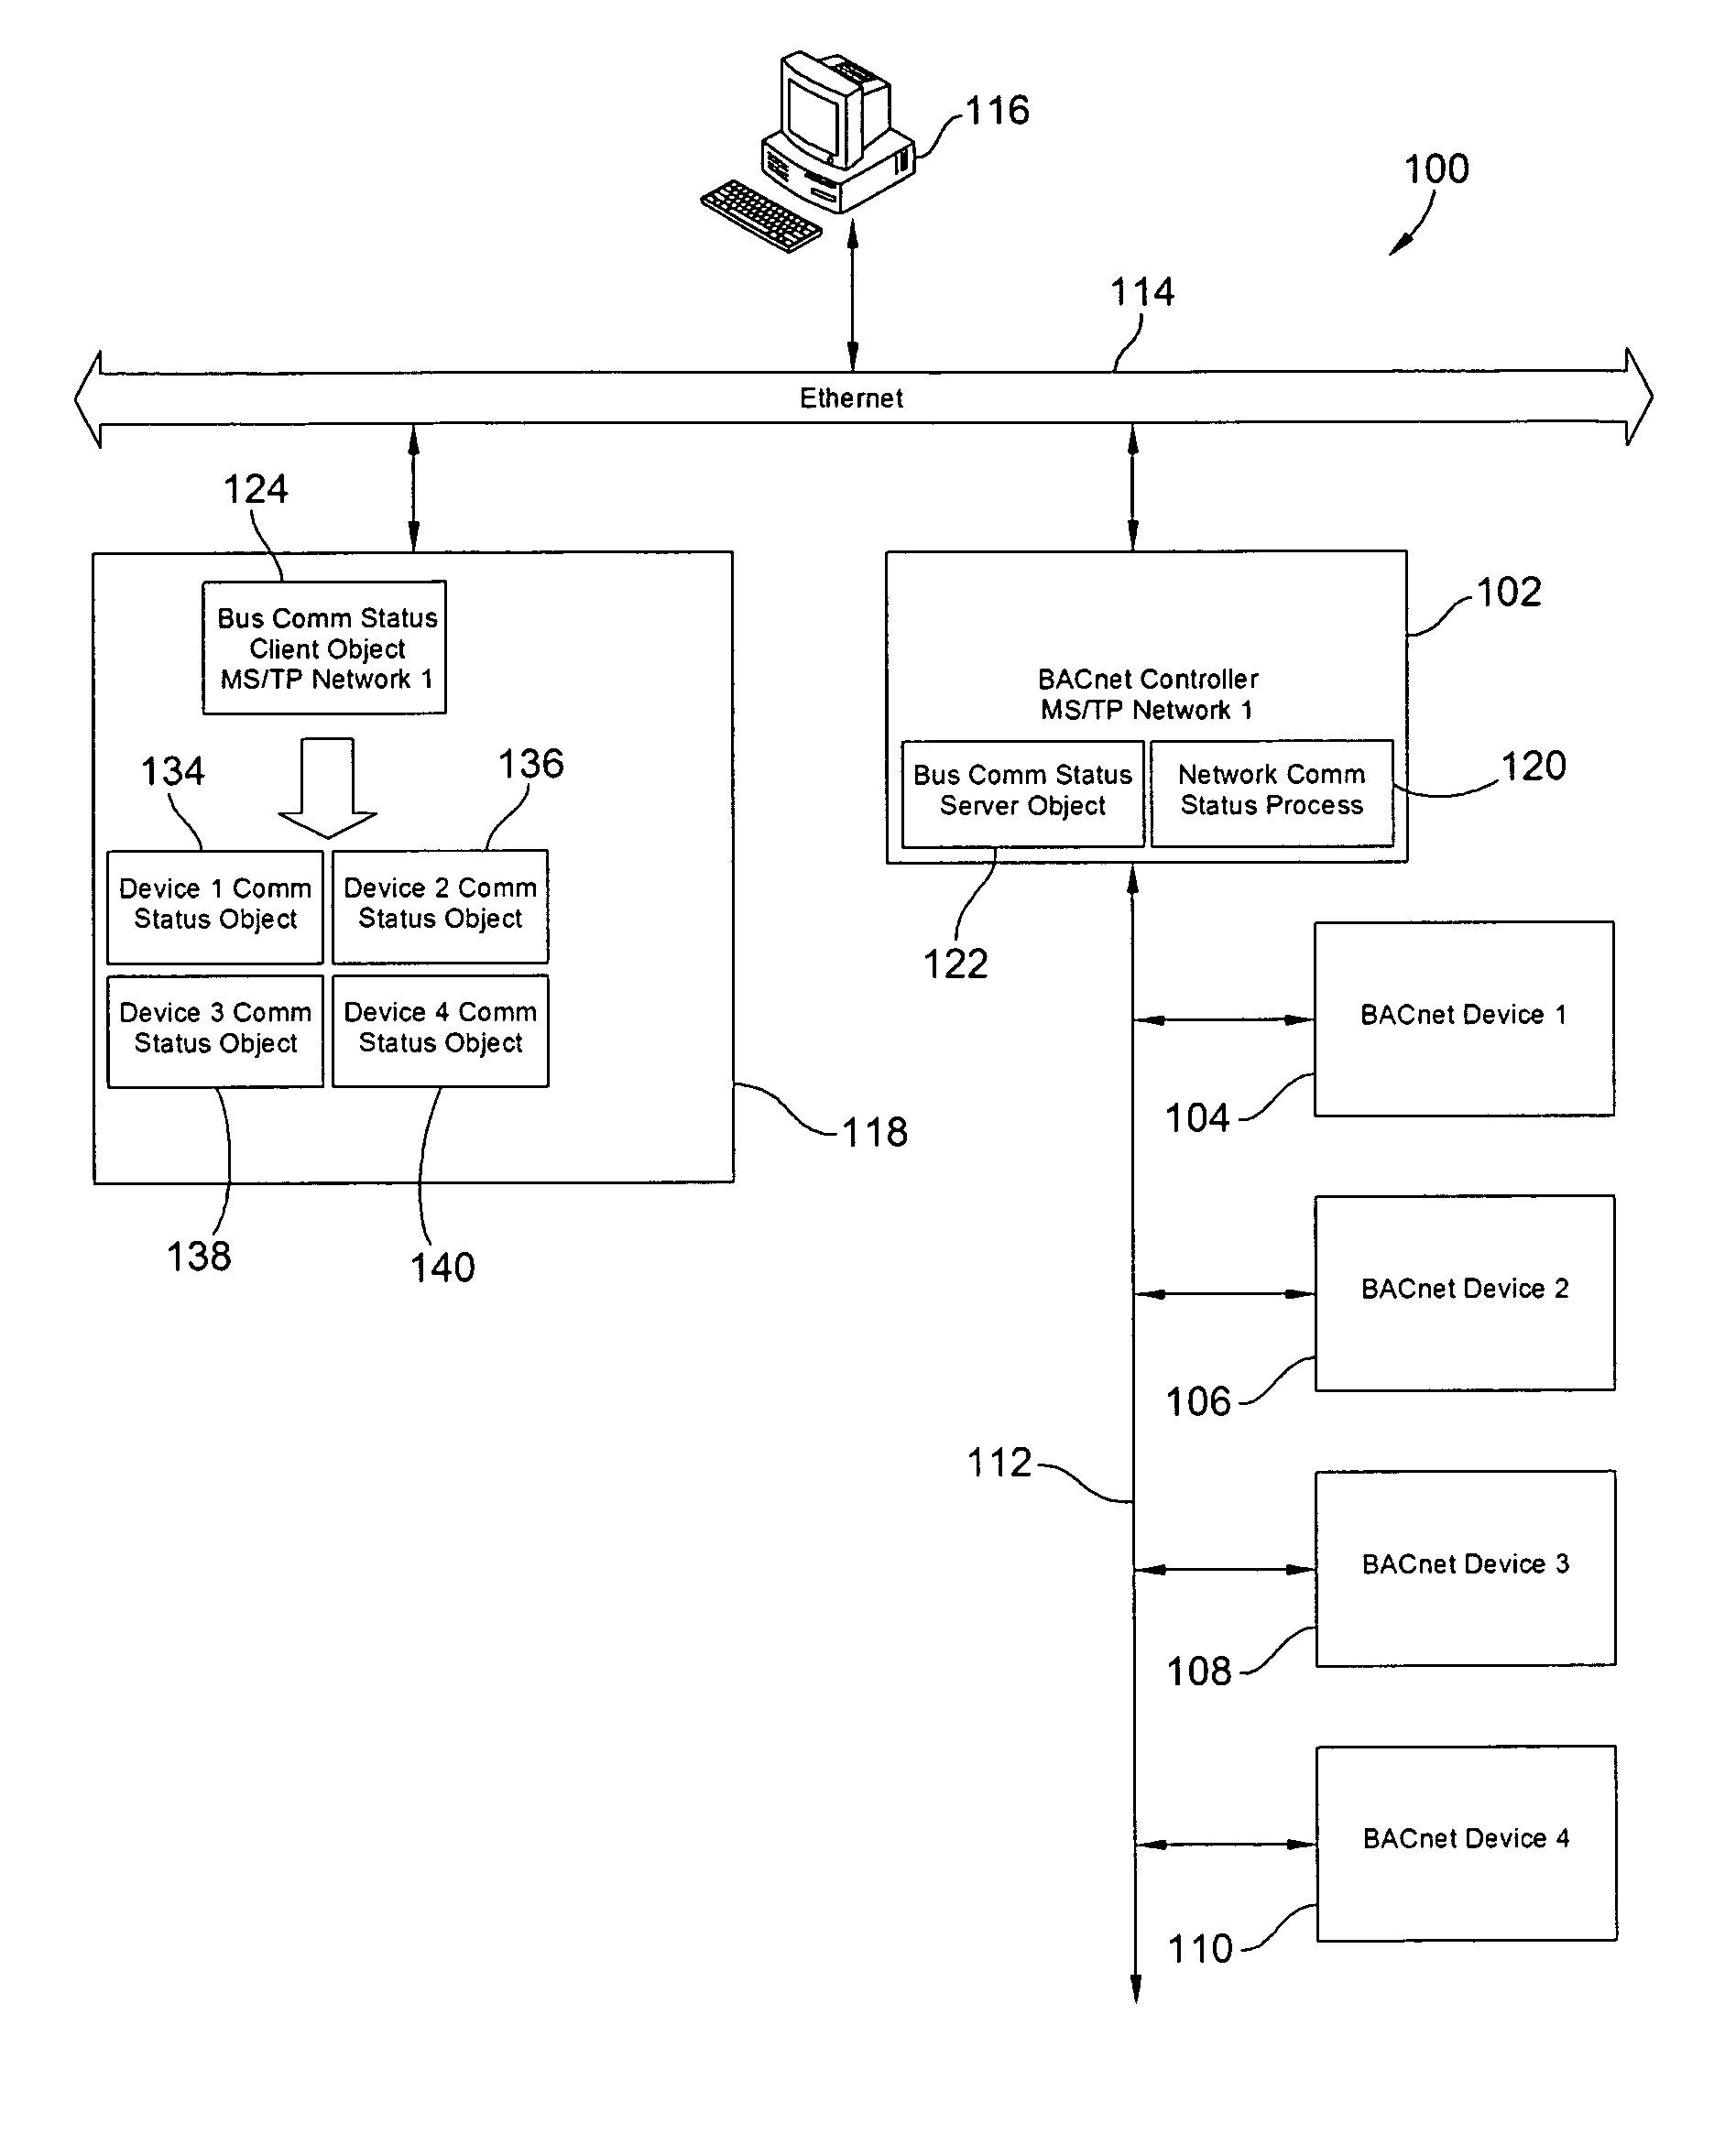 BACnet communication Status objects and methods of determining communication status of BACnet devices